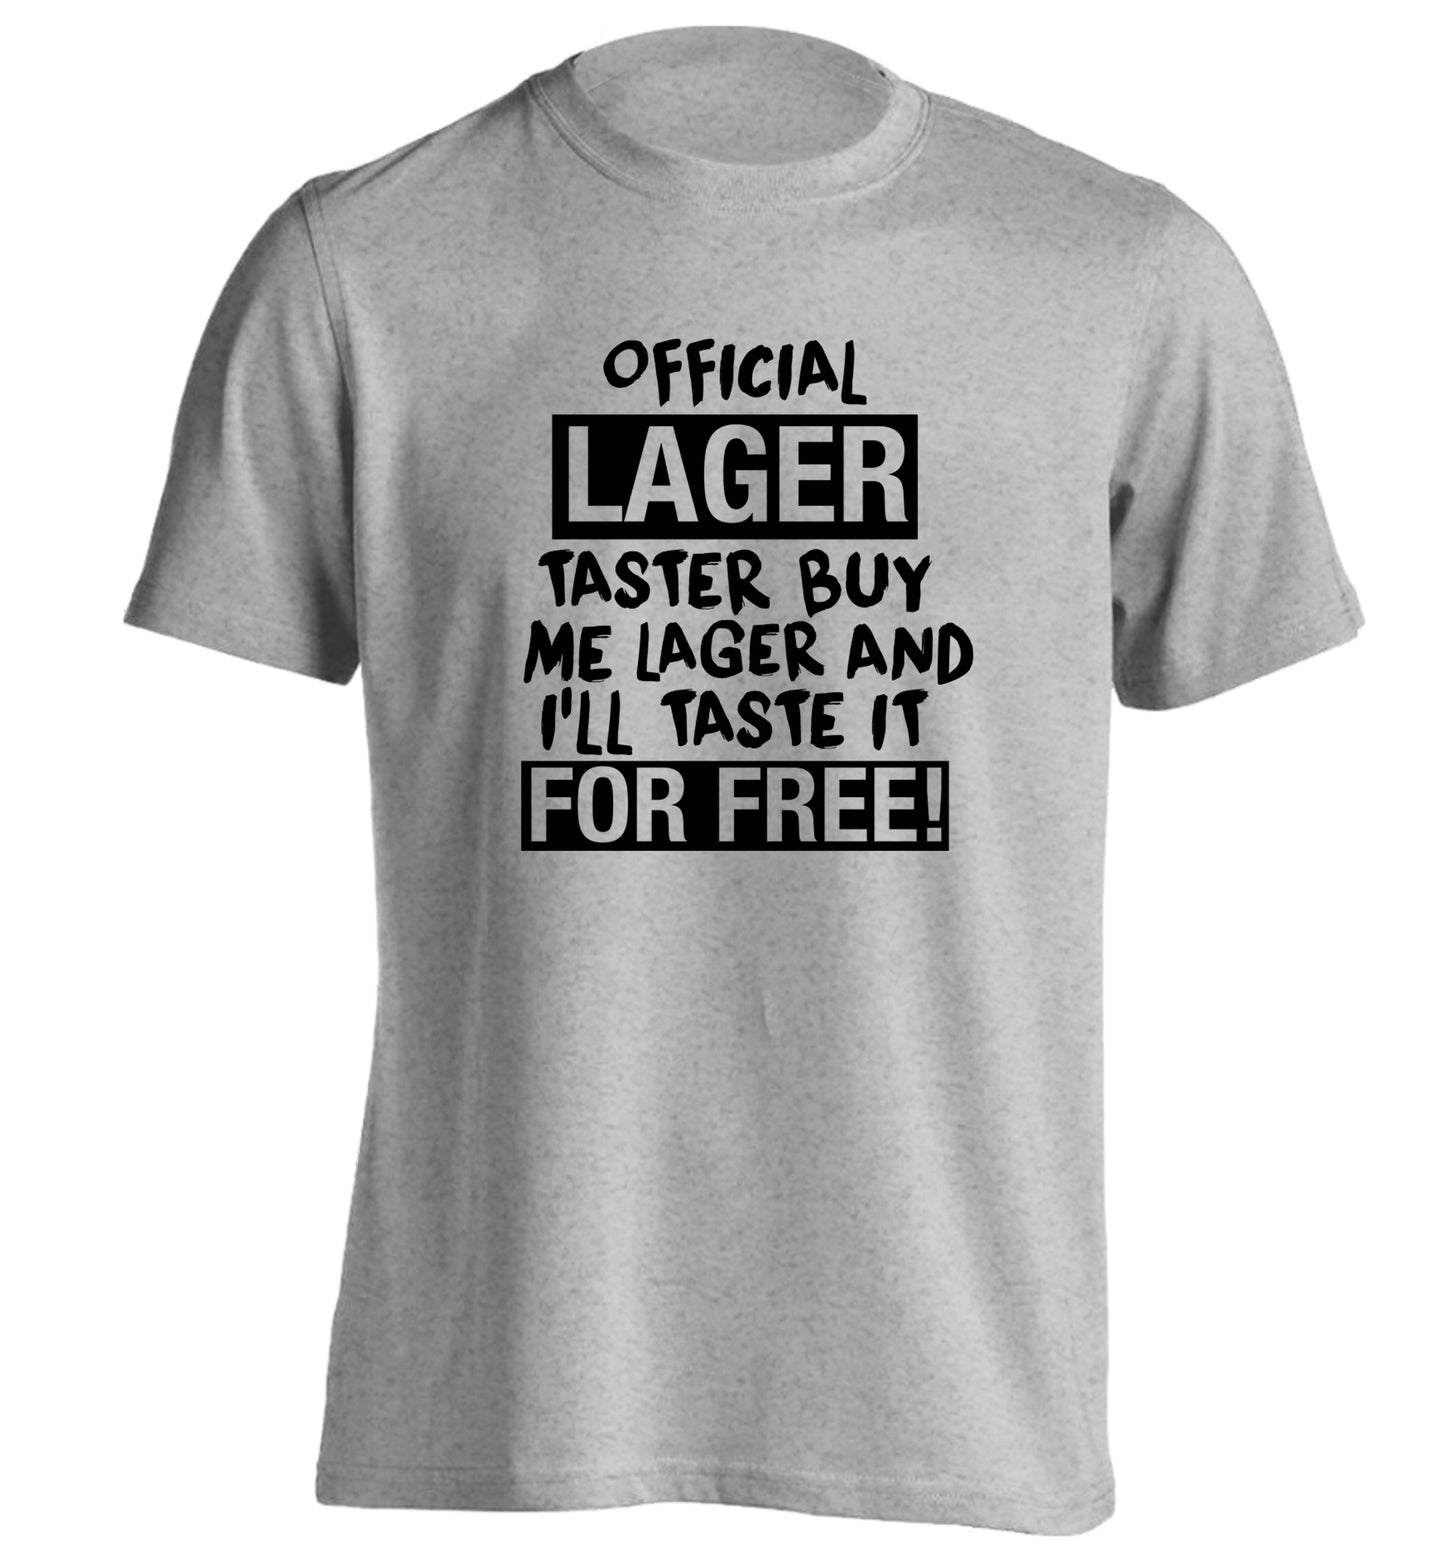 Official lager taster buy me lager and I'll taste it for free! adults unisex grey Tshirt 2XL